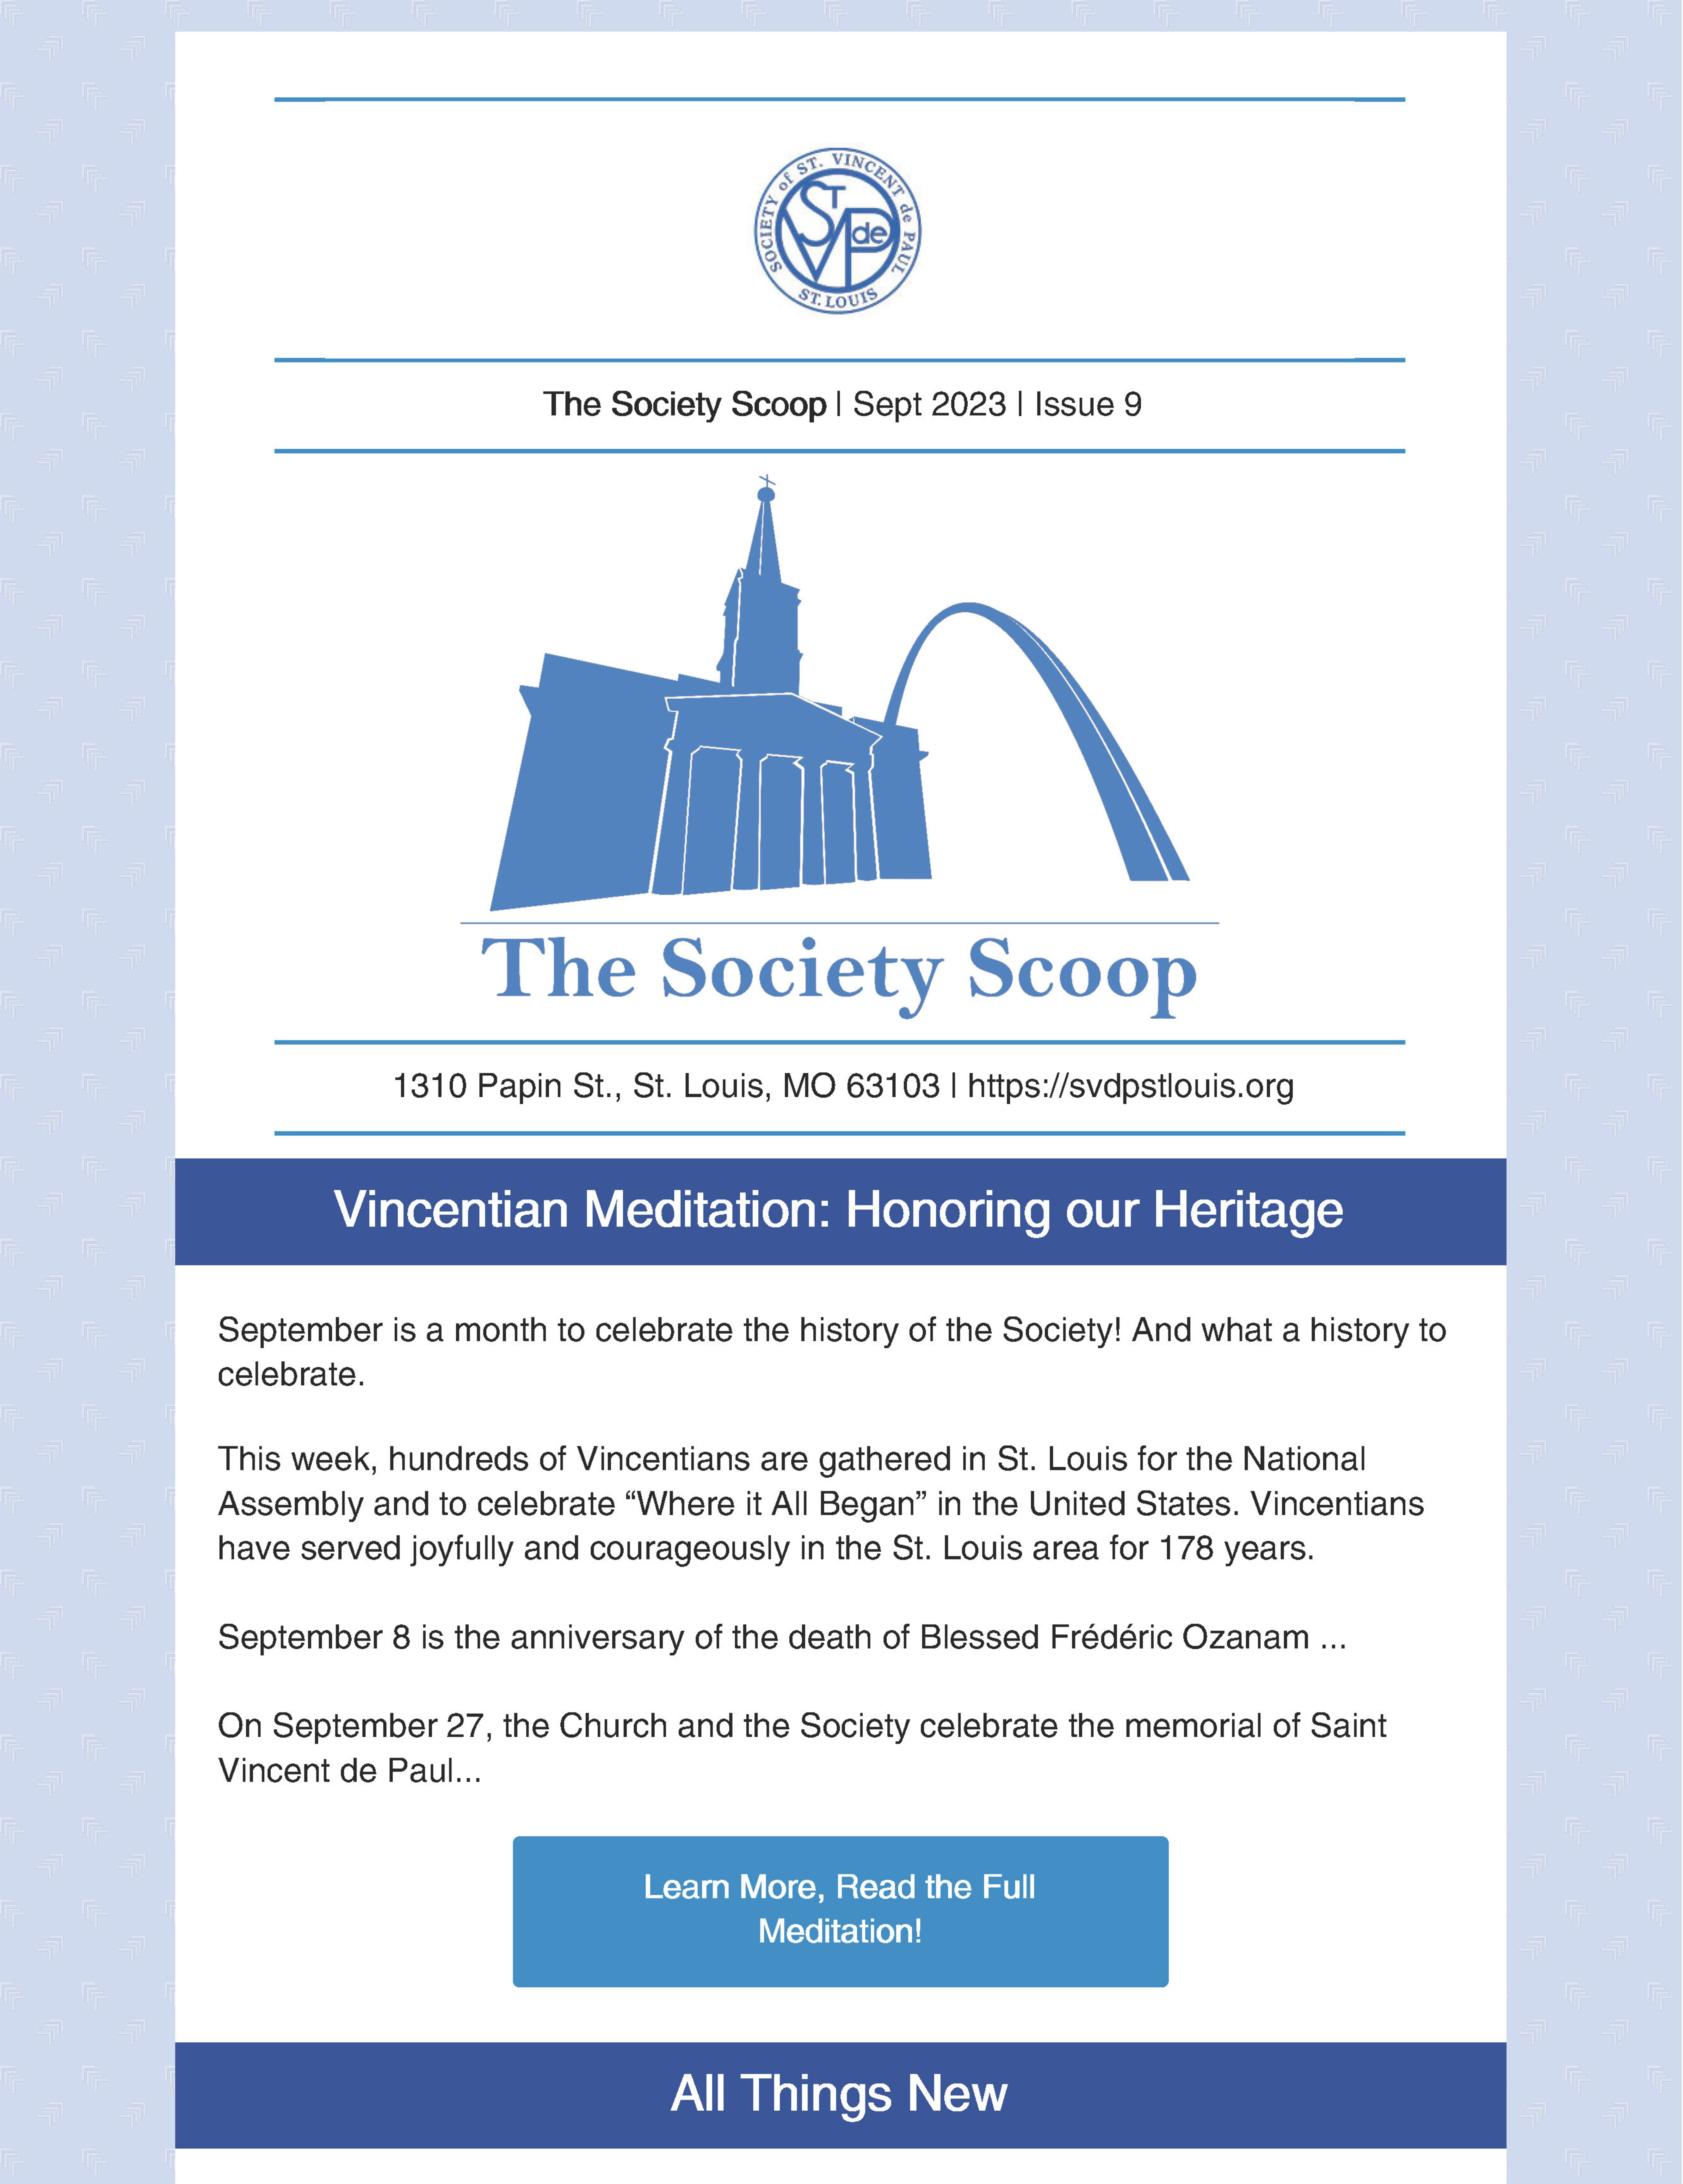 The Society Scoop Sept 2023